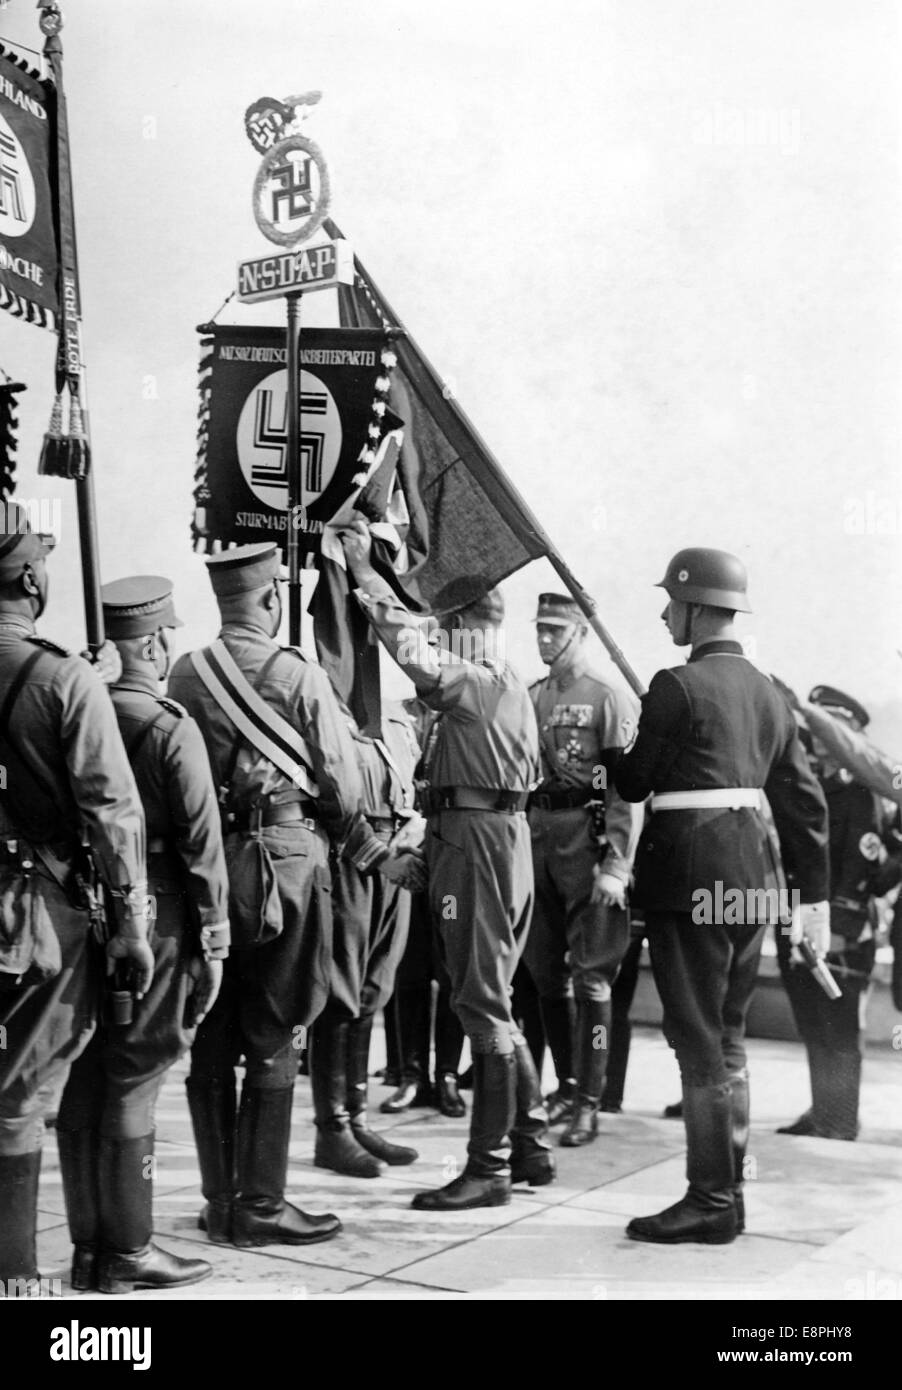 Nuremberg Rally 1938 in Nuremberg, Germany - The new standards are consecrated by Adolf Hitler with the 'Blood Flag', behind Hitler the standard bearer Jakob Grimminger. During the consecration of the flags new standards of Sturmabteilung (SA) und Schutzstaffel (SS) were touched to the 'Blood Flag', which supposedly was carried during the failed Beer Hall Putsch, and thereby consecrated. (Flaws in quality due to the historic picture copy) Fotoarchiv für Zeitgeschichtee - NO WIRE SERVICE - Stock Photo